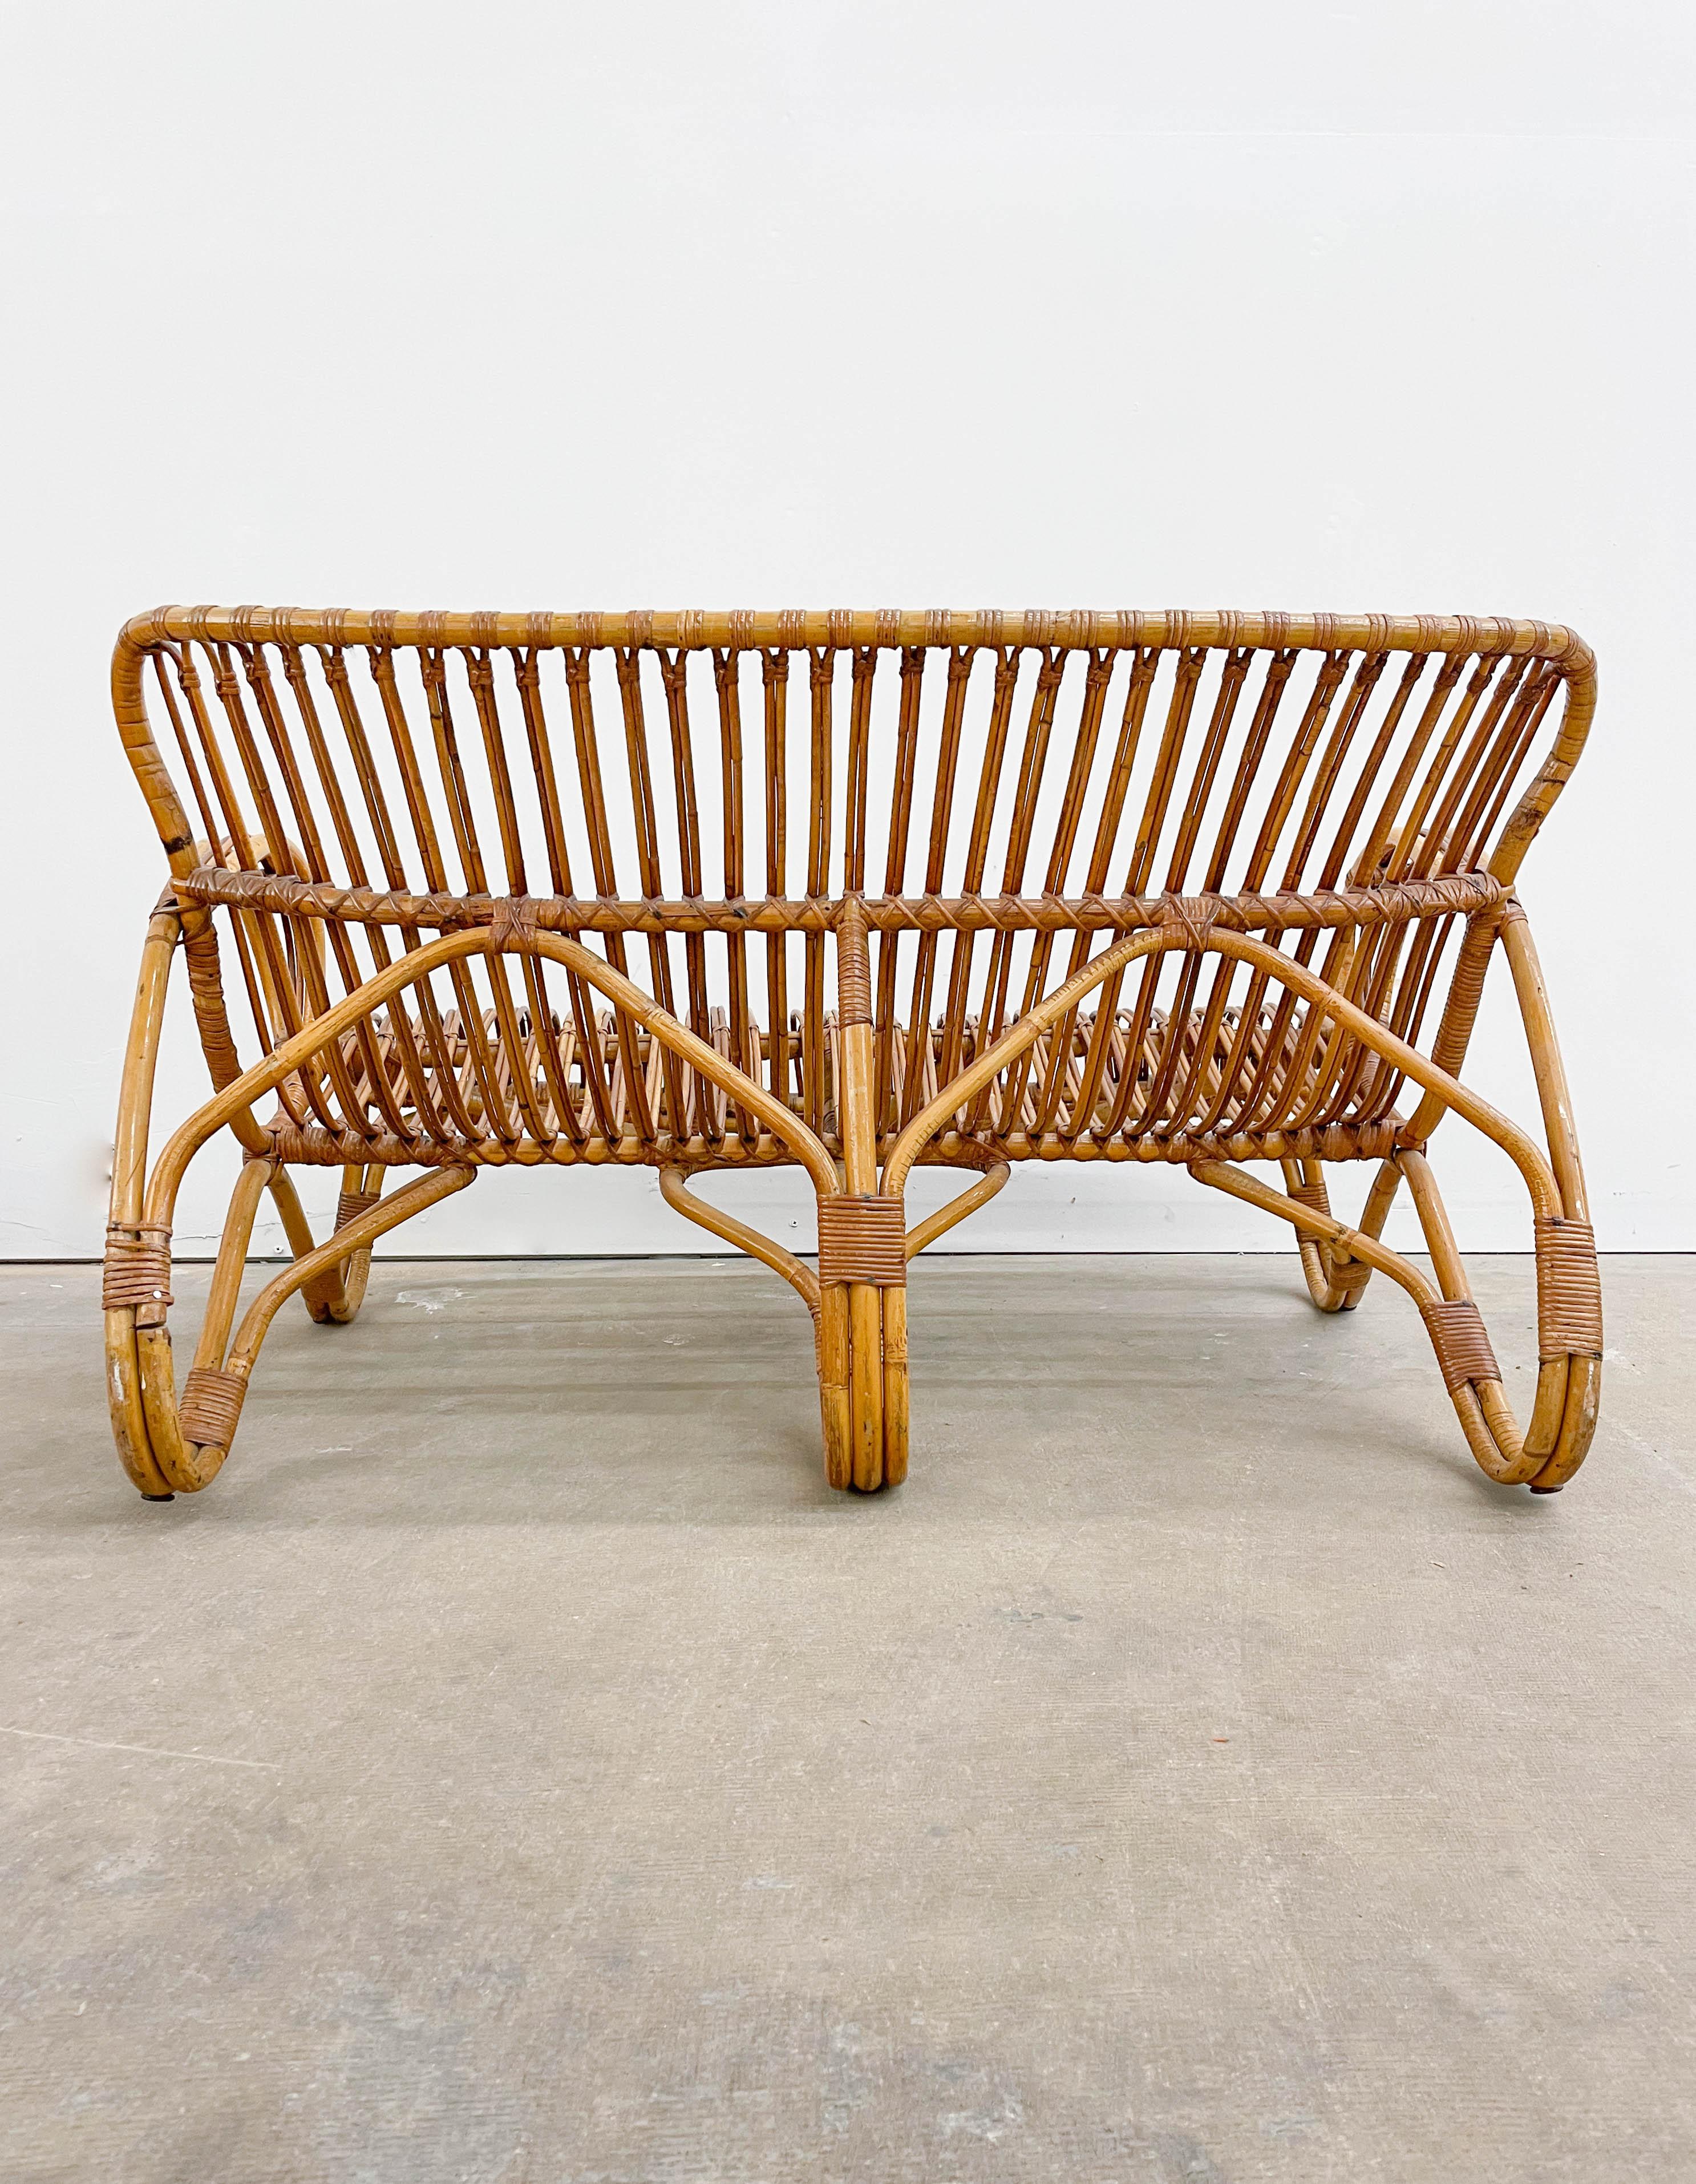 Vintage Sculptural Bamboo Sofa by Rohe Noorwolde, 1960s For Sale 1